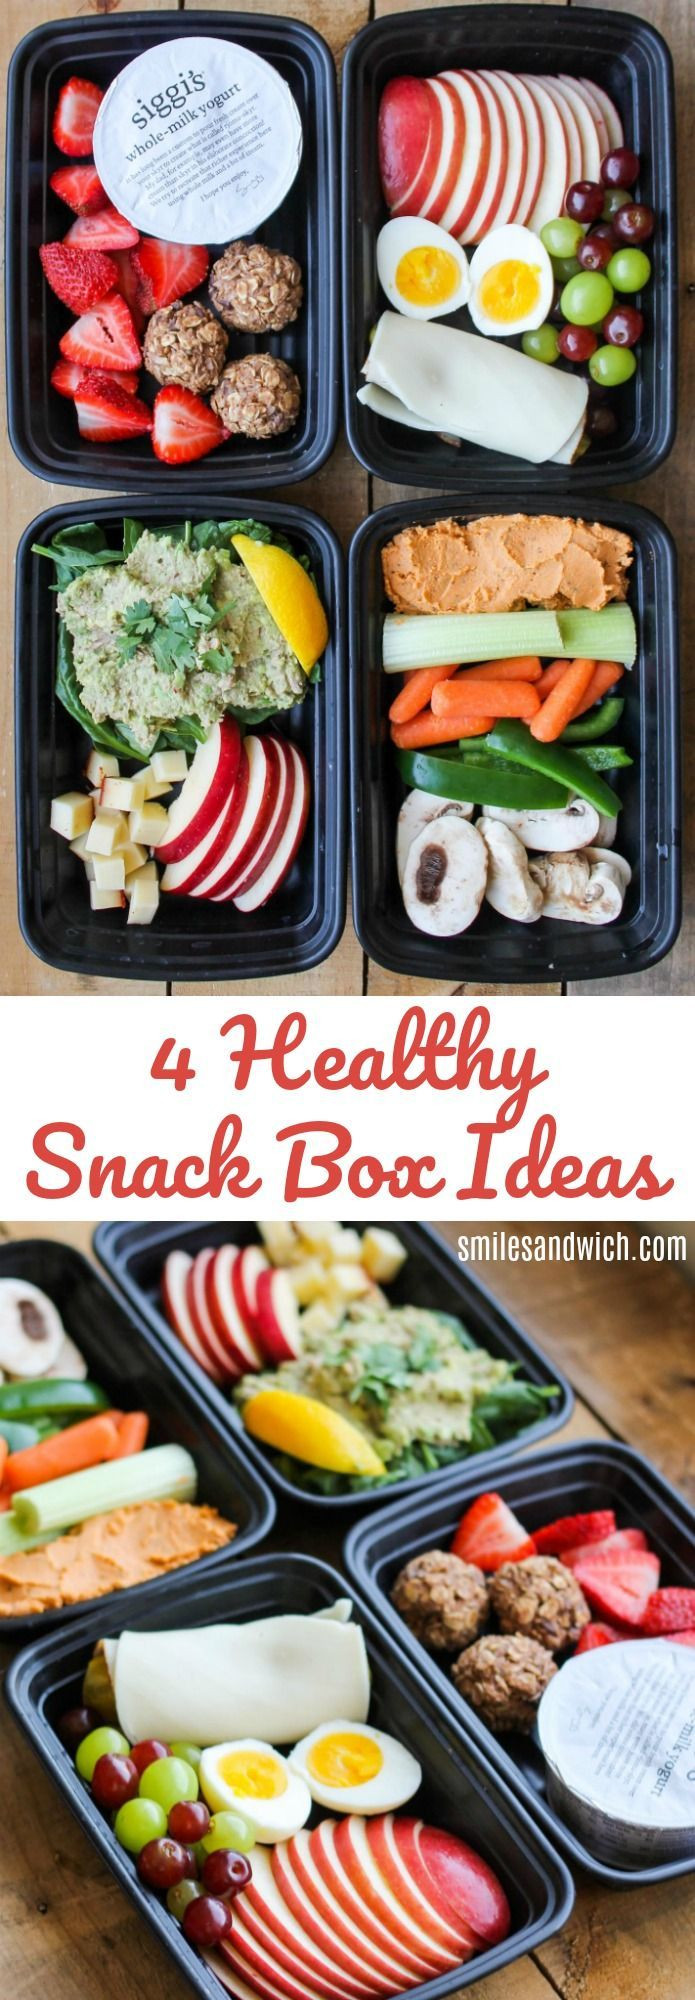 Healthy Snacks Low Carb
 Best 25 Healthy snacks ideas on Pinterest